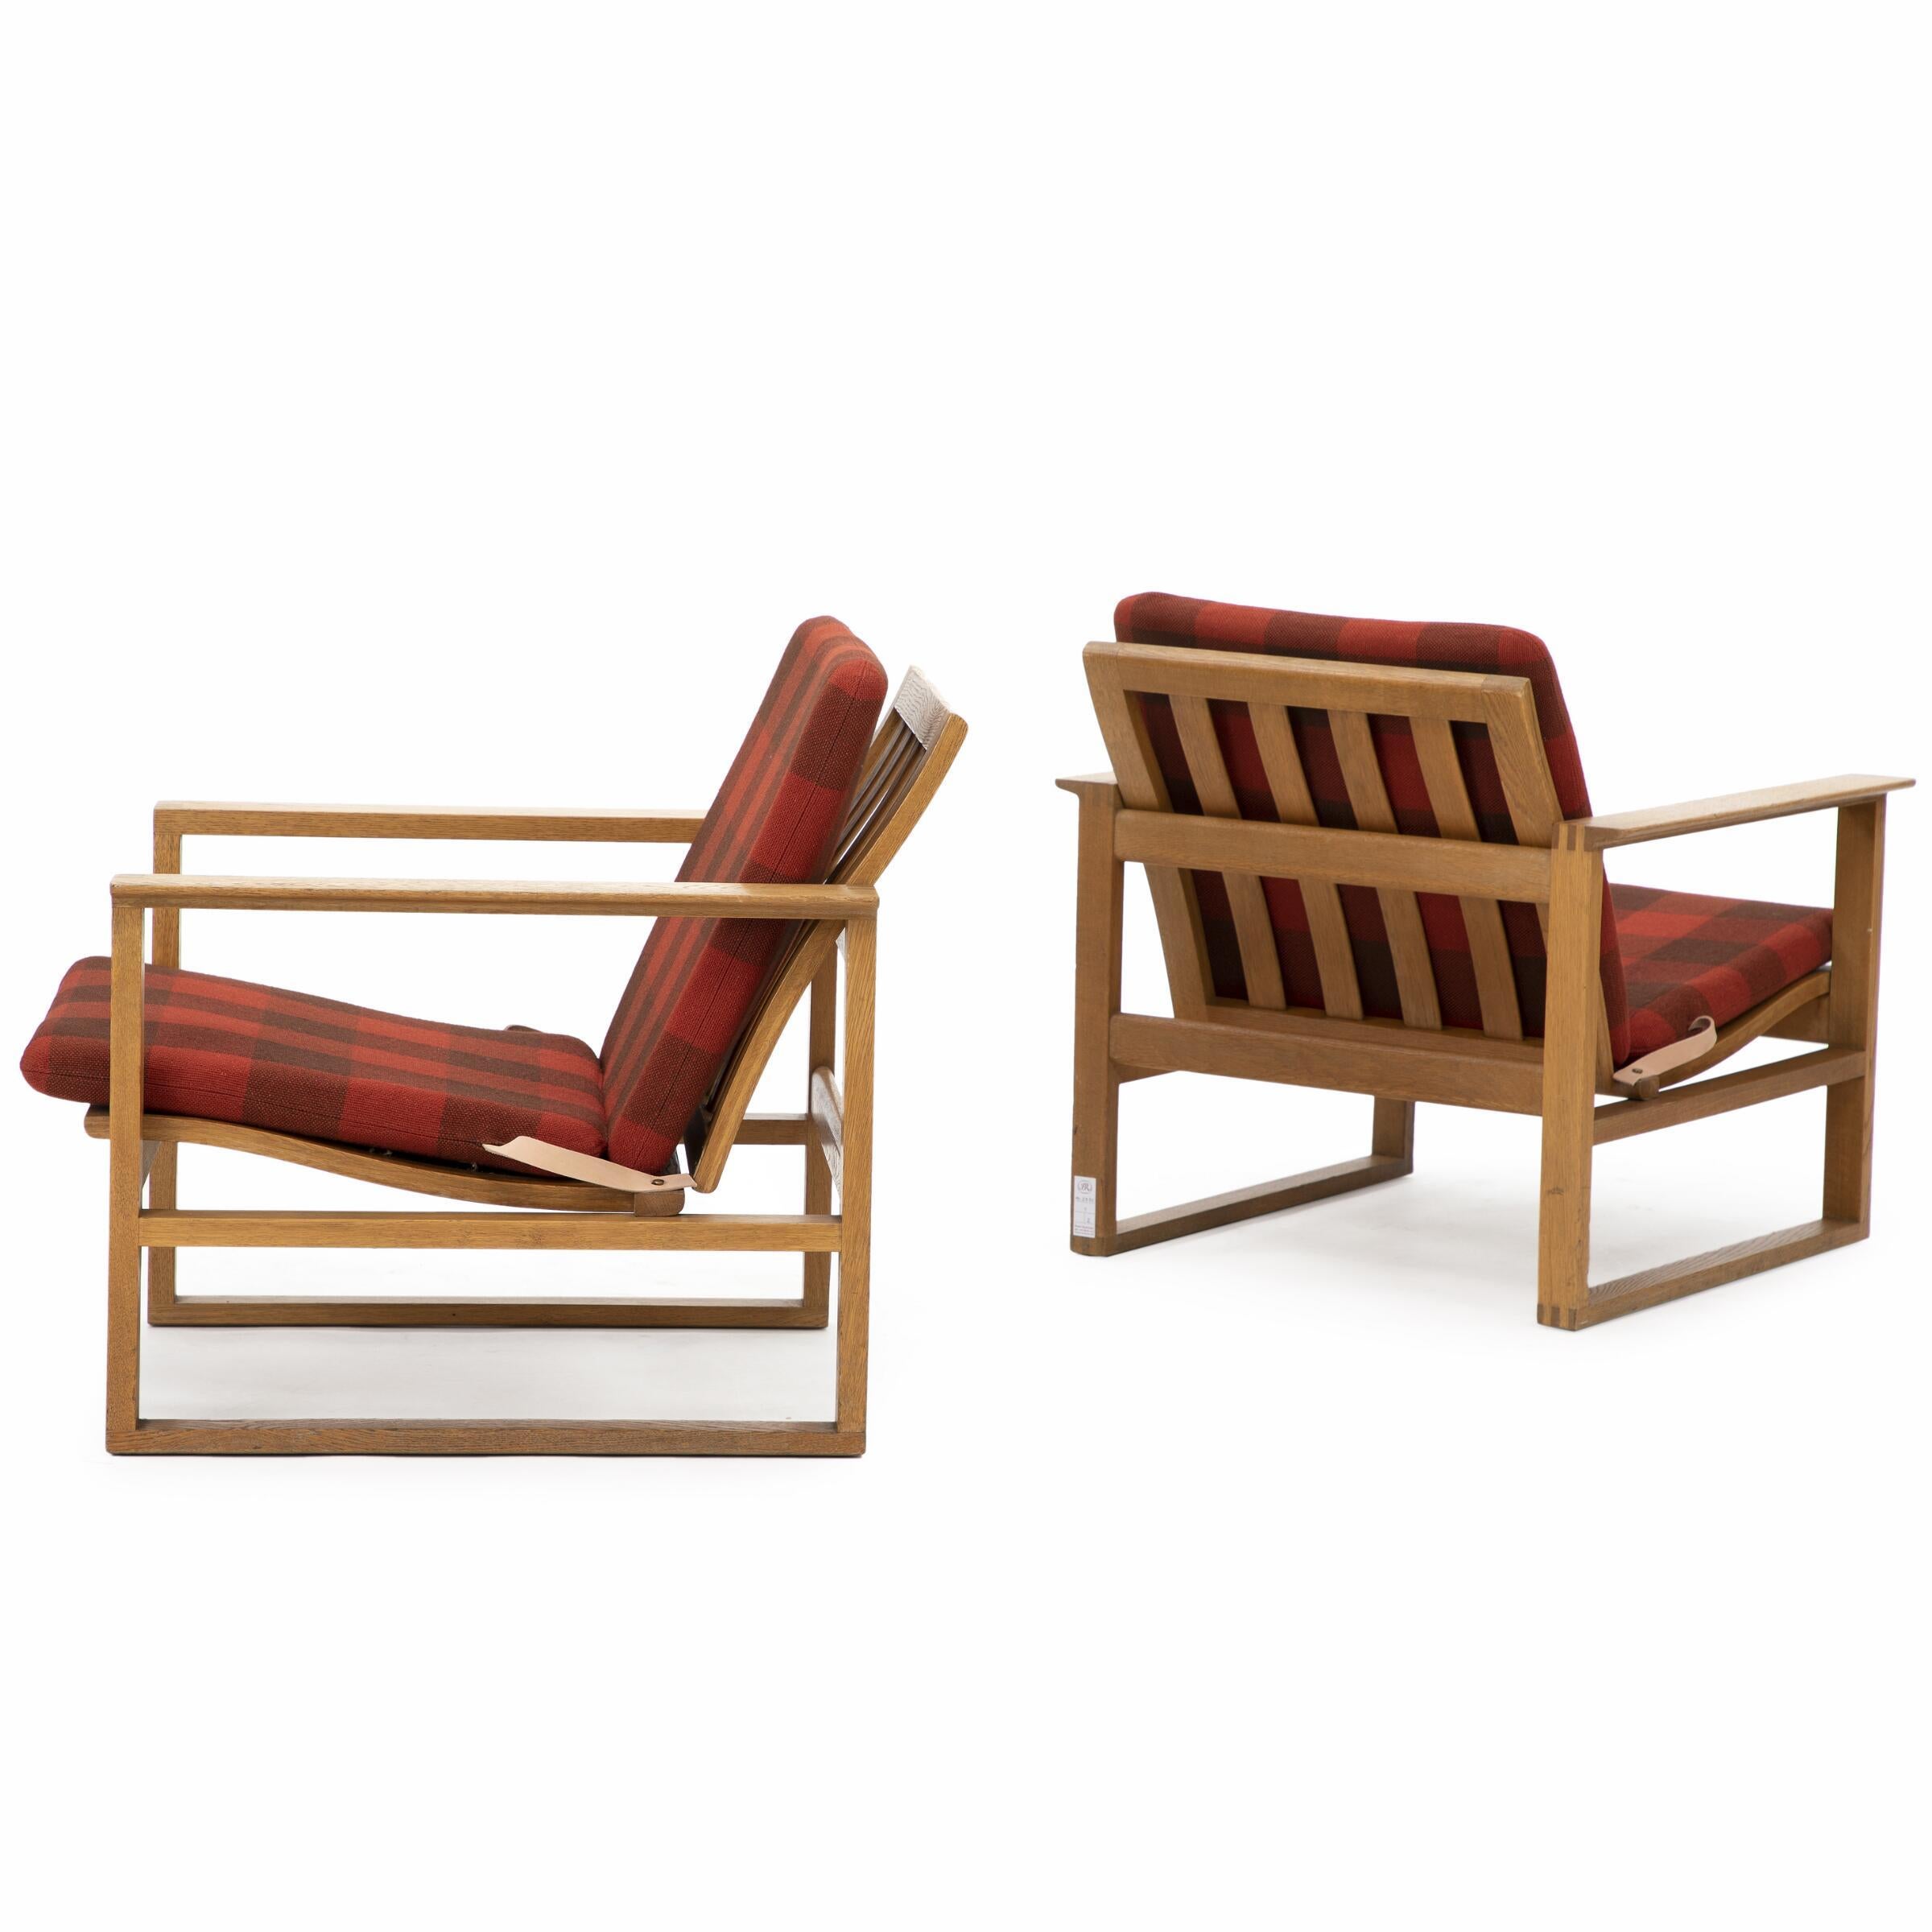 Pair of “Runner Chairs” by Børge Mogensen. 
A pair of easy chairs with oak frame, loose cushions in seat and back upholstered with red checquered wool. Model 2256. Manufactured and marked by Fredericia Stolefabrik.
Dimensions: 26 W 30 D 27 H ;